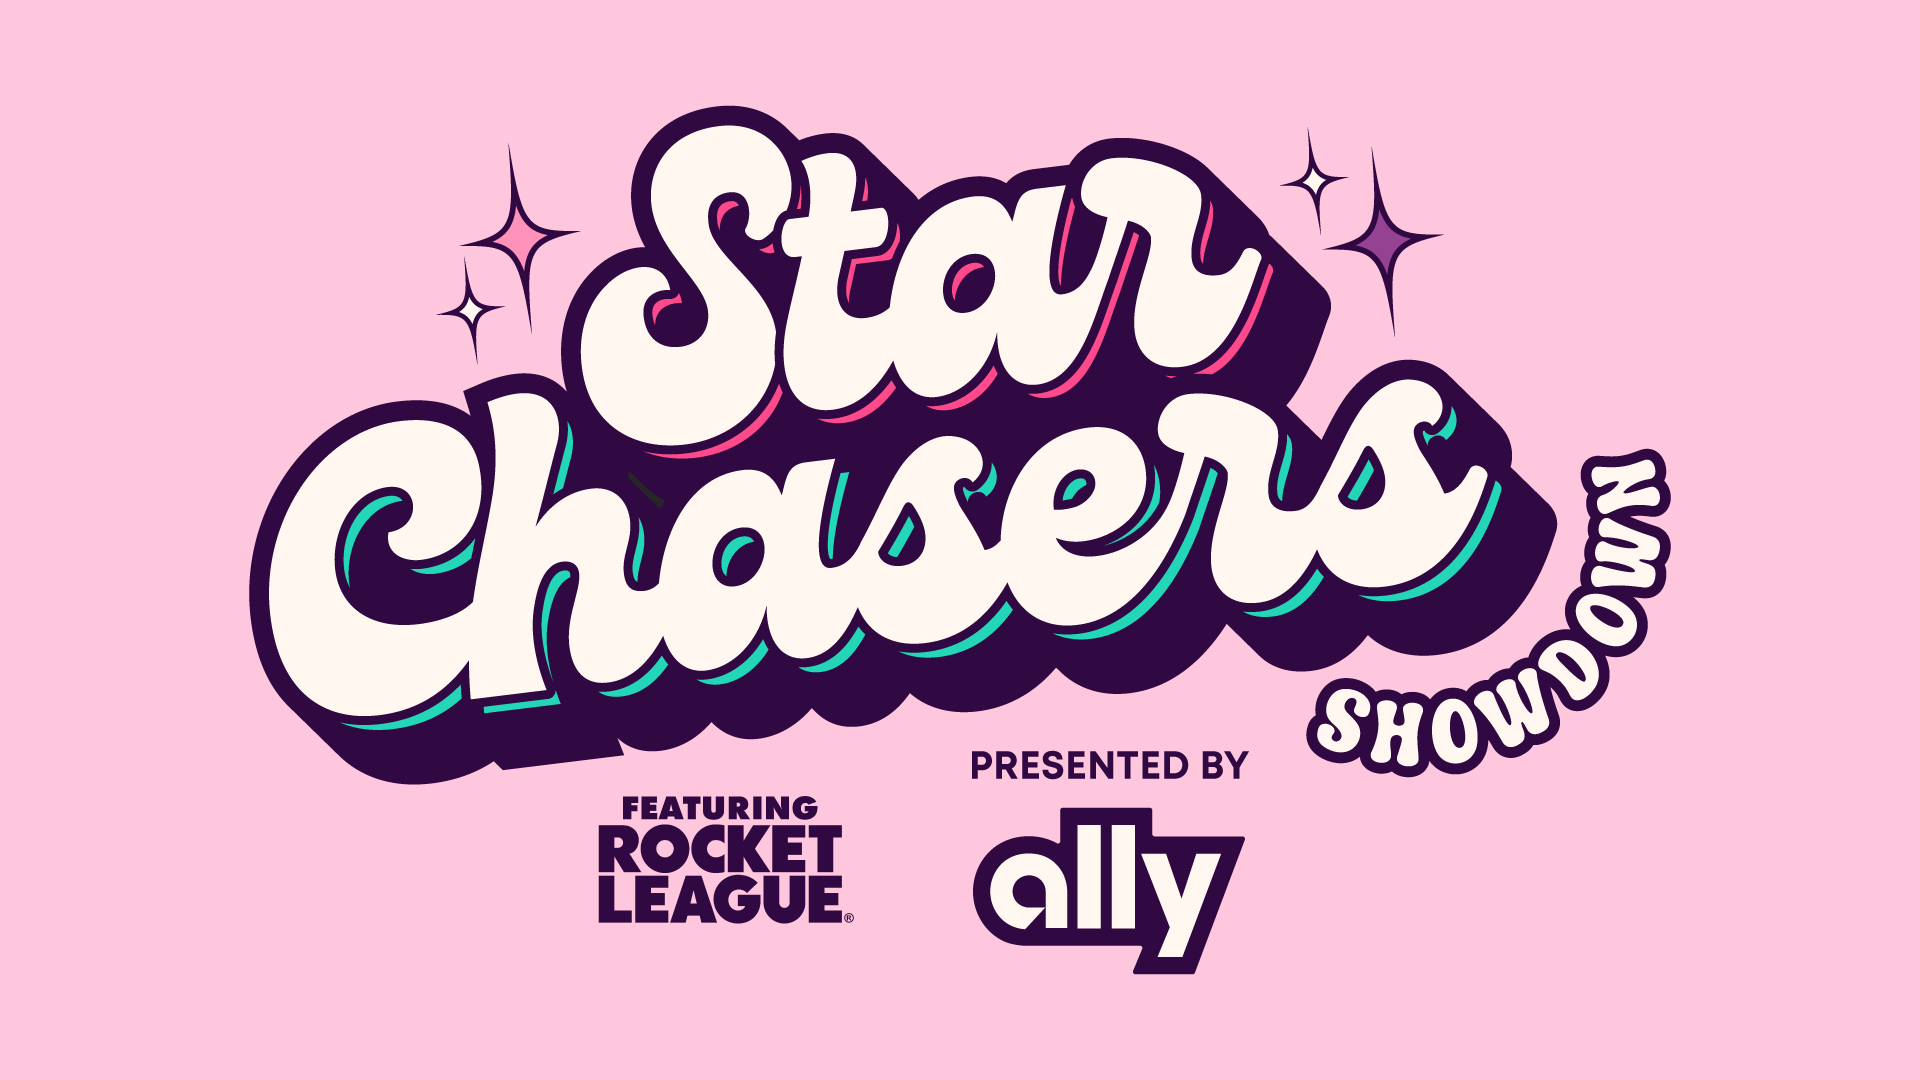 Star Chasers Showdown Series #1 Event Logo